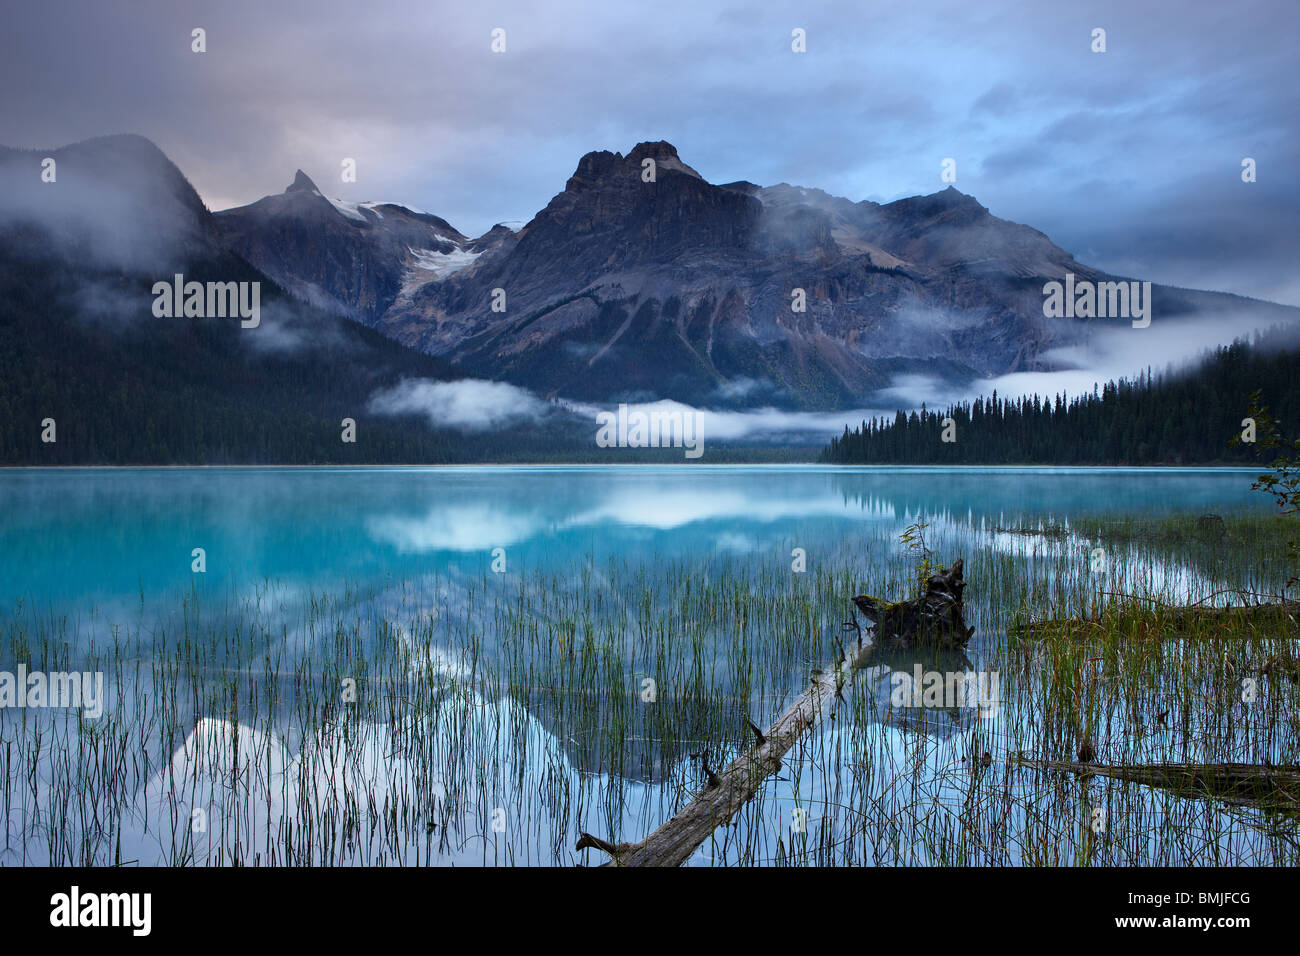 Emerald Lake at dawn with the peaks of the President Range beyond, Yoho National Park, British Columbia, Canada Stock Photo